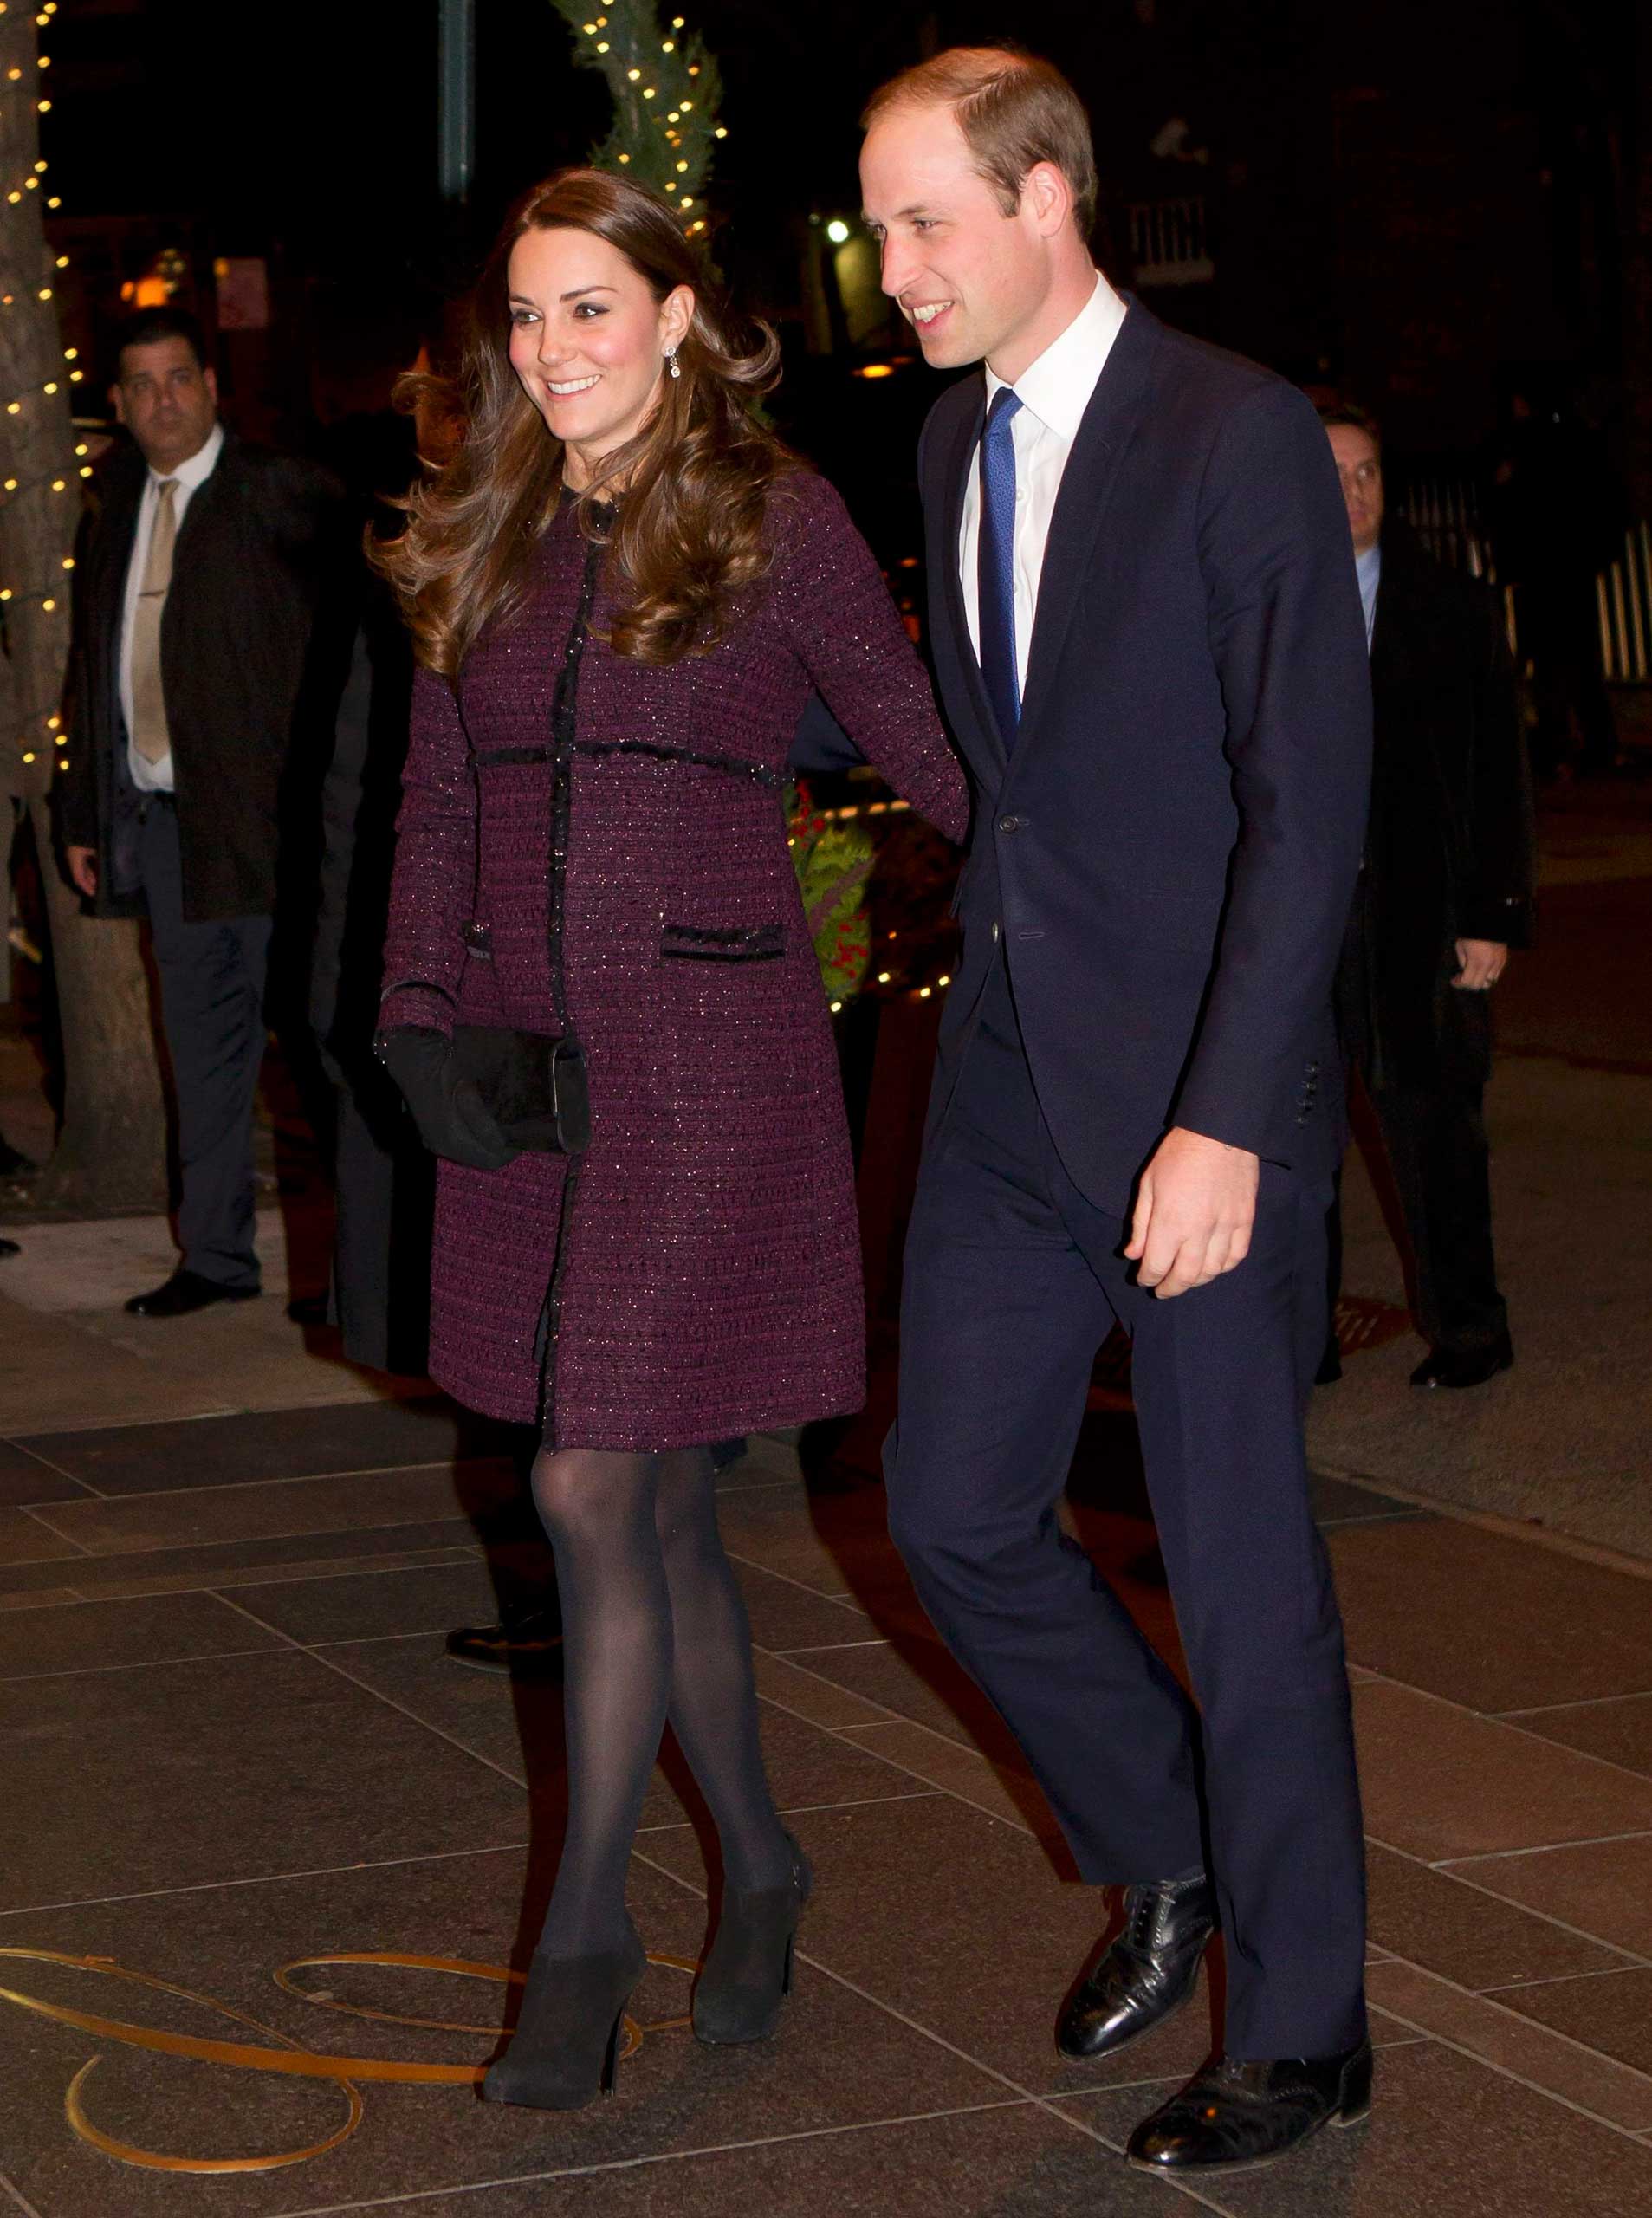 Catherine, Duchess of Cambridge arrives at the Carlyle hotel in New York on Dec. 7, 2014.